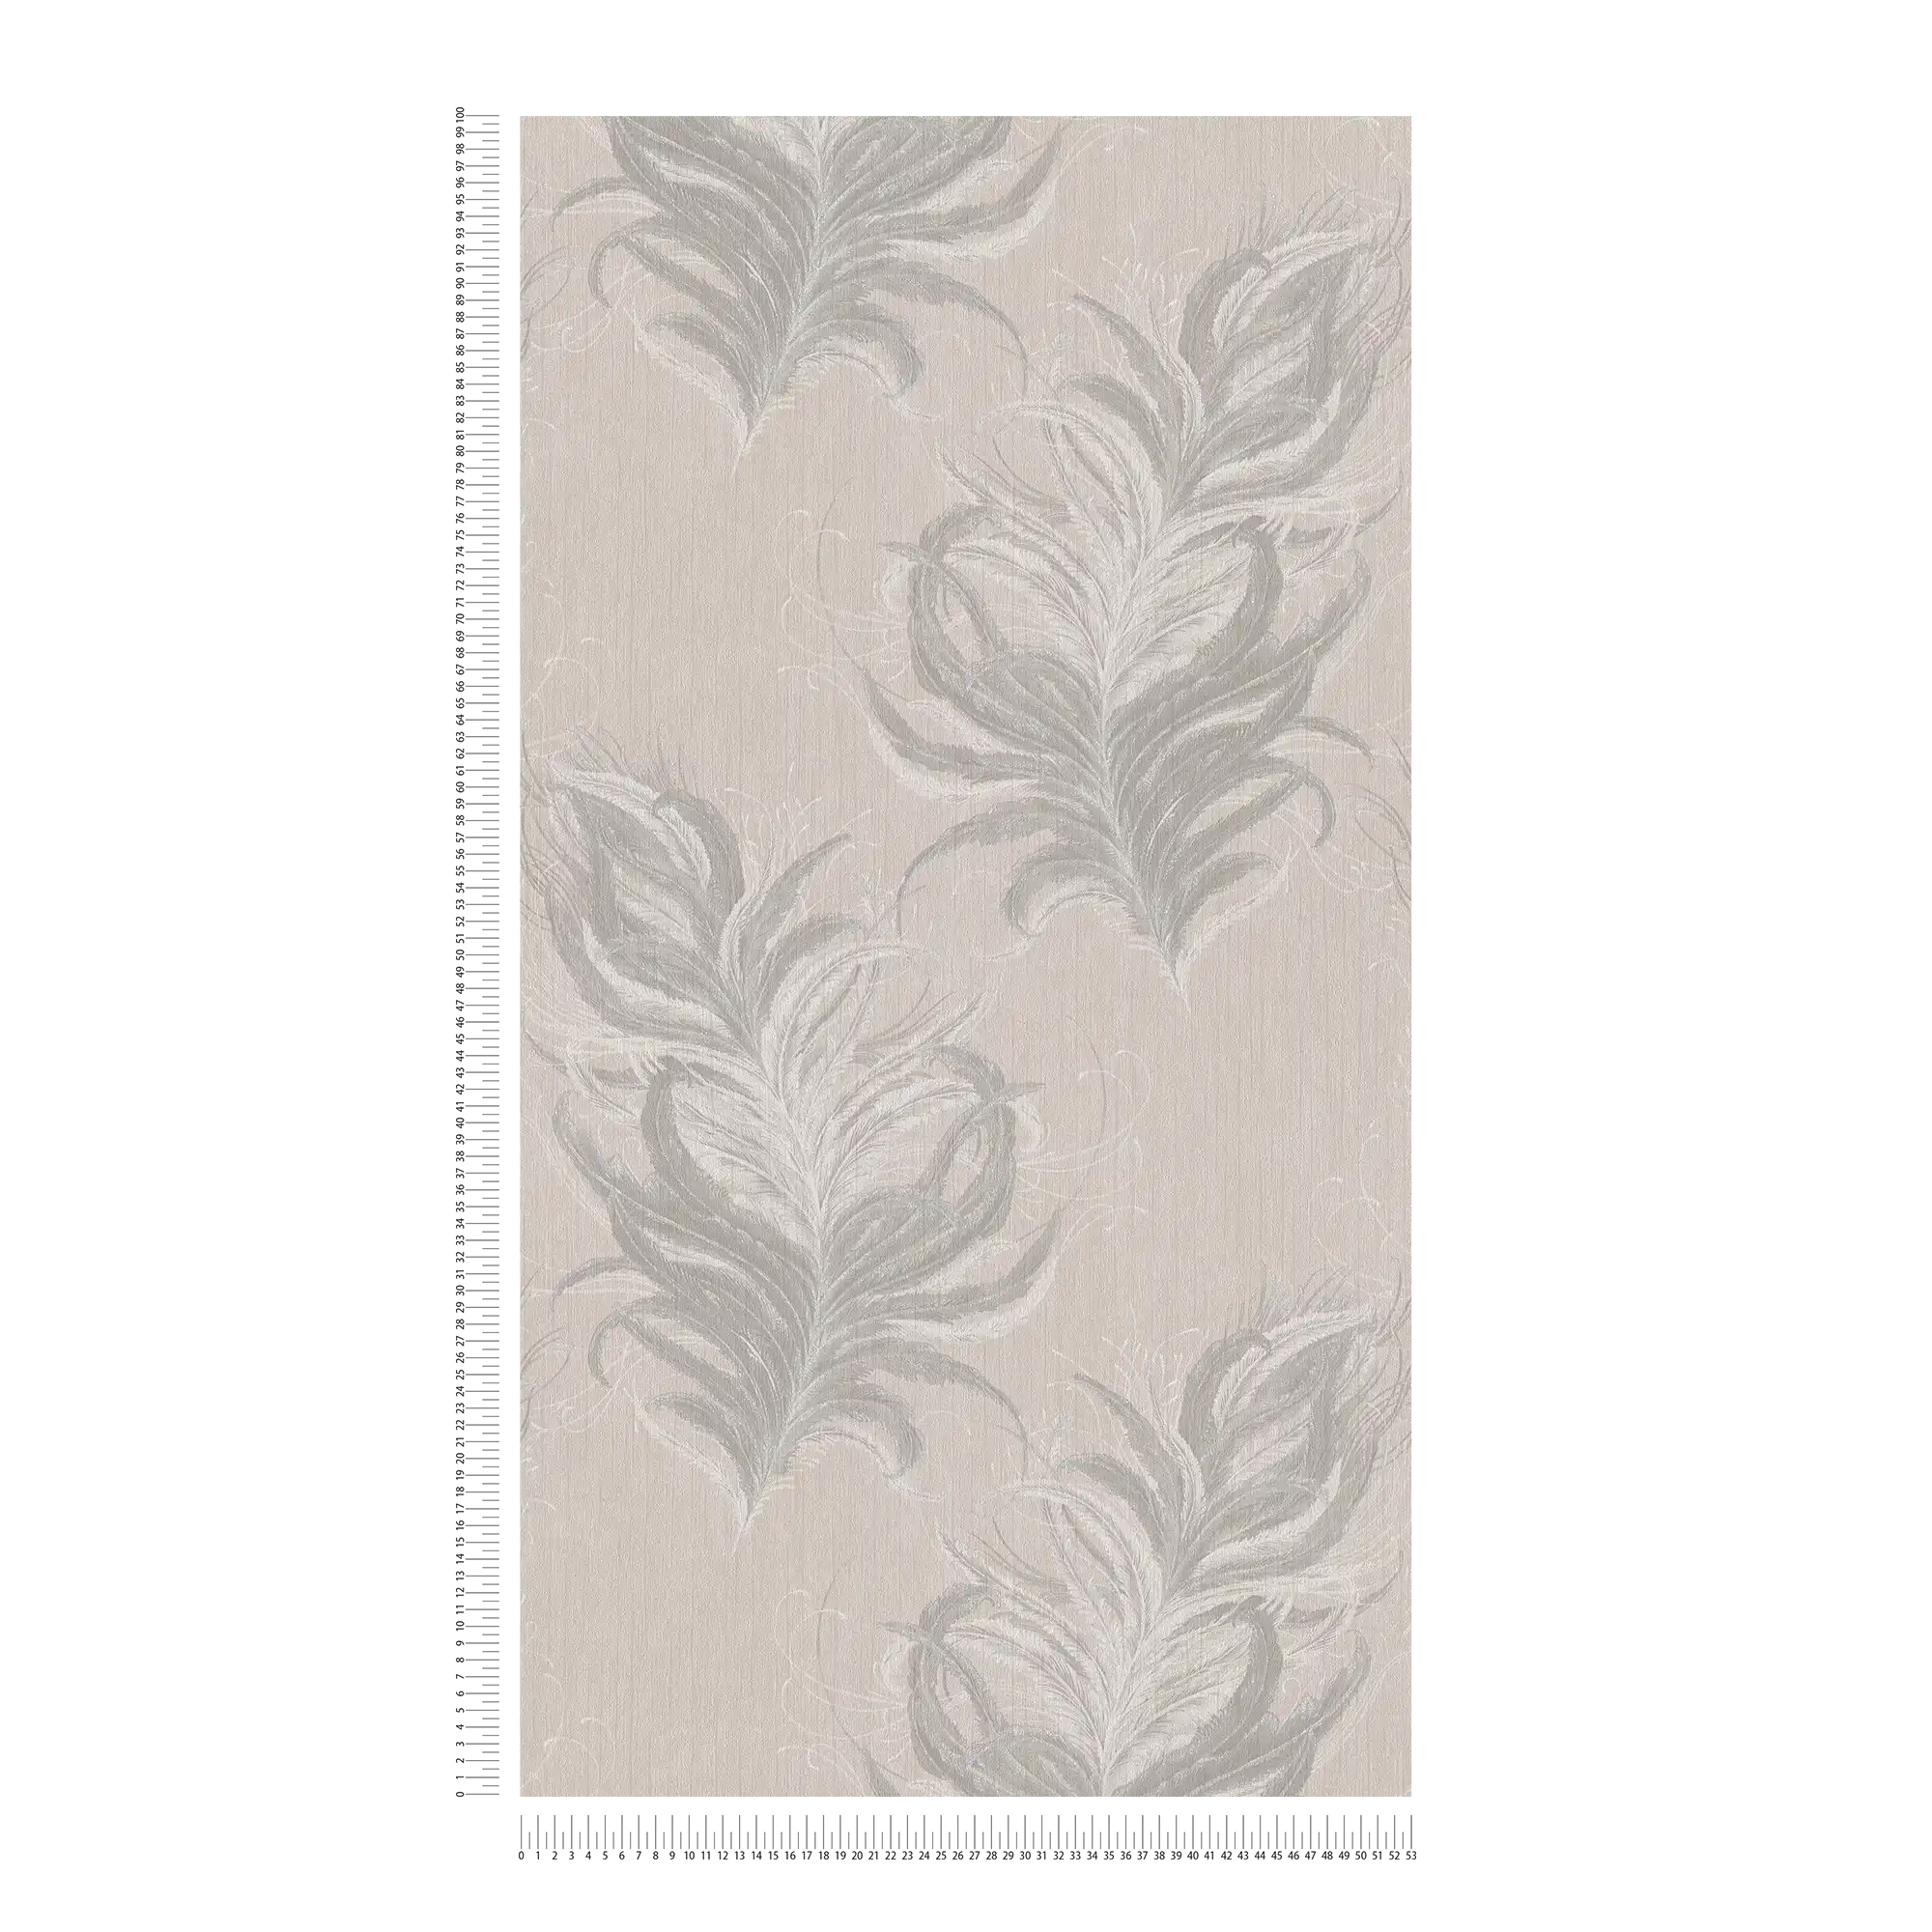             Non-woven wallpaper with feathers design & structure gloss effect - grey, white
        